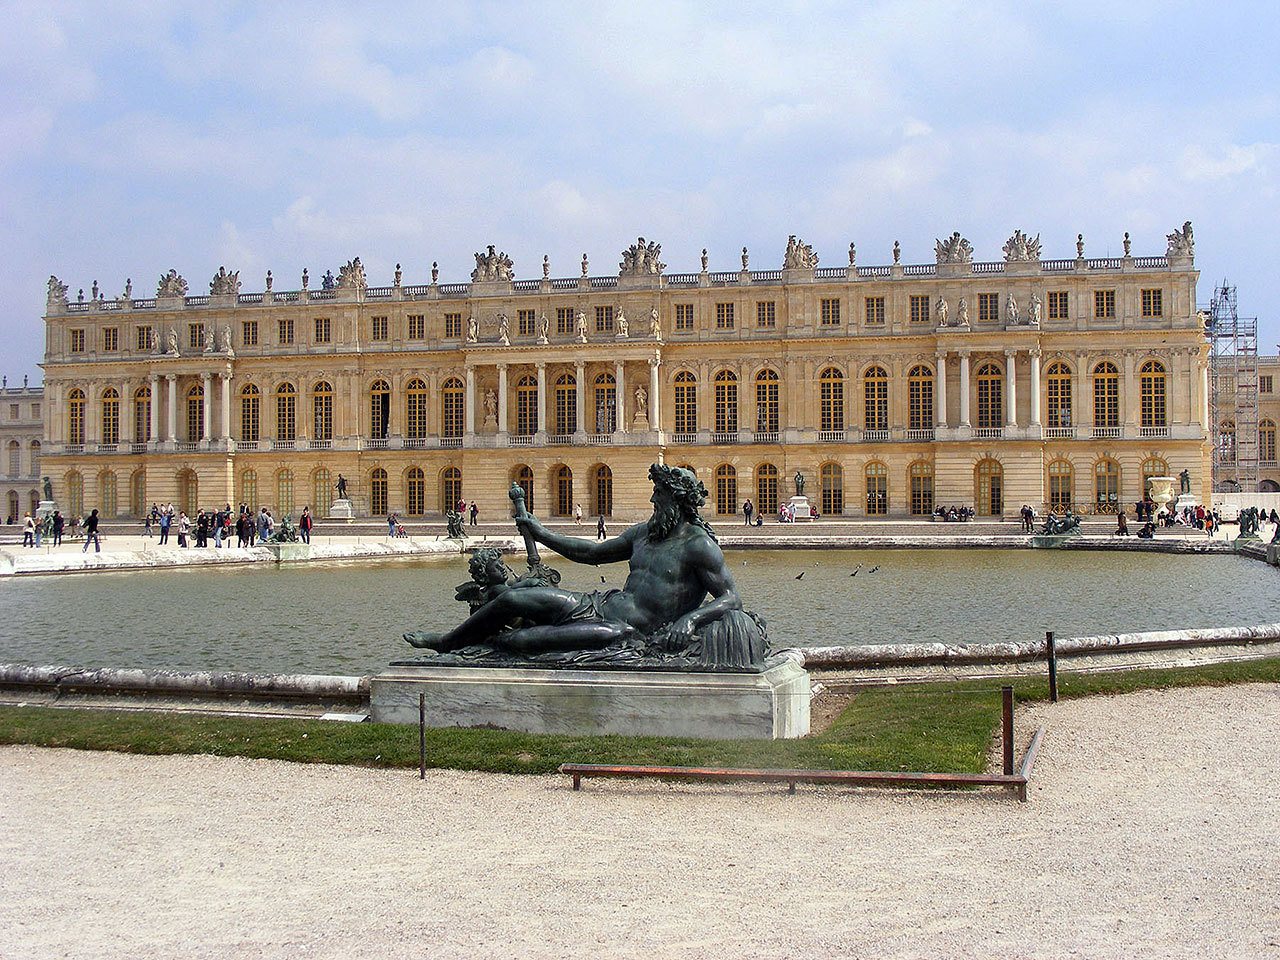 Visitors will notice increased security at tourist sites throughout France, especially at high-profile places like Versailles.